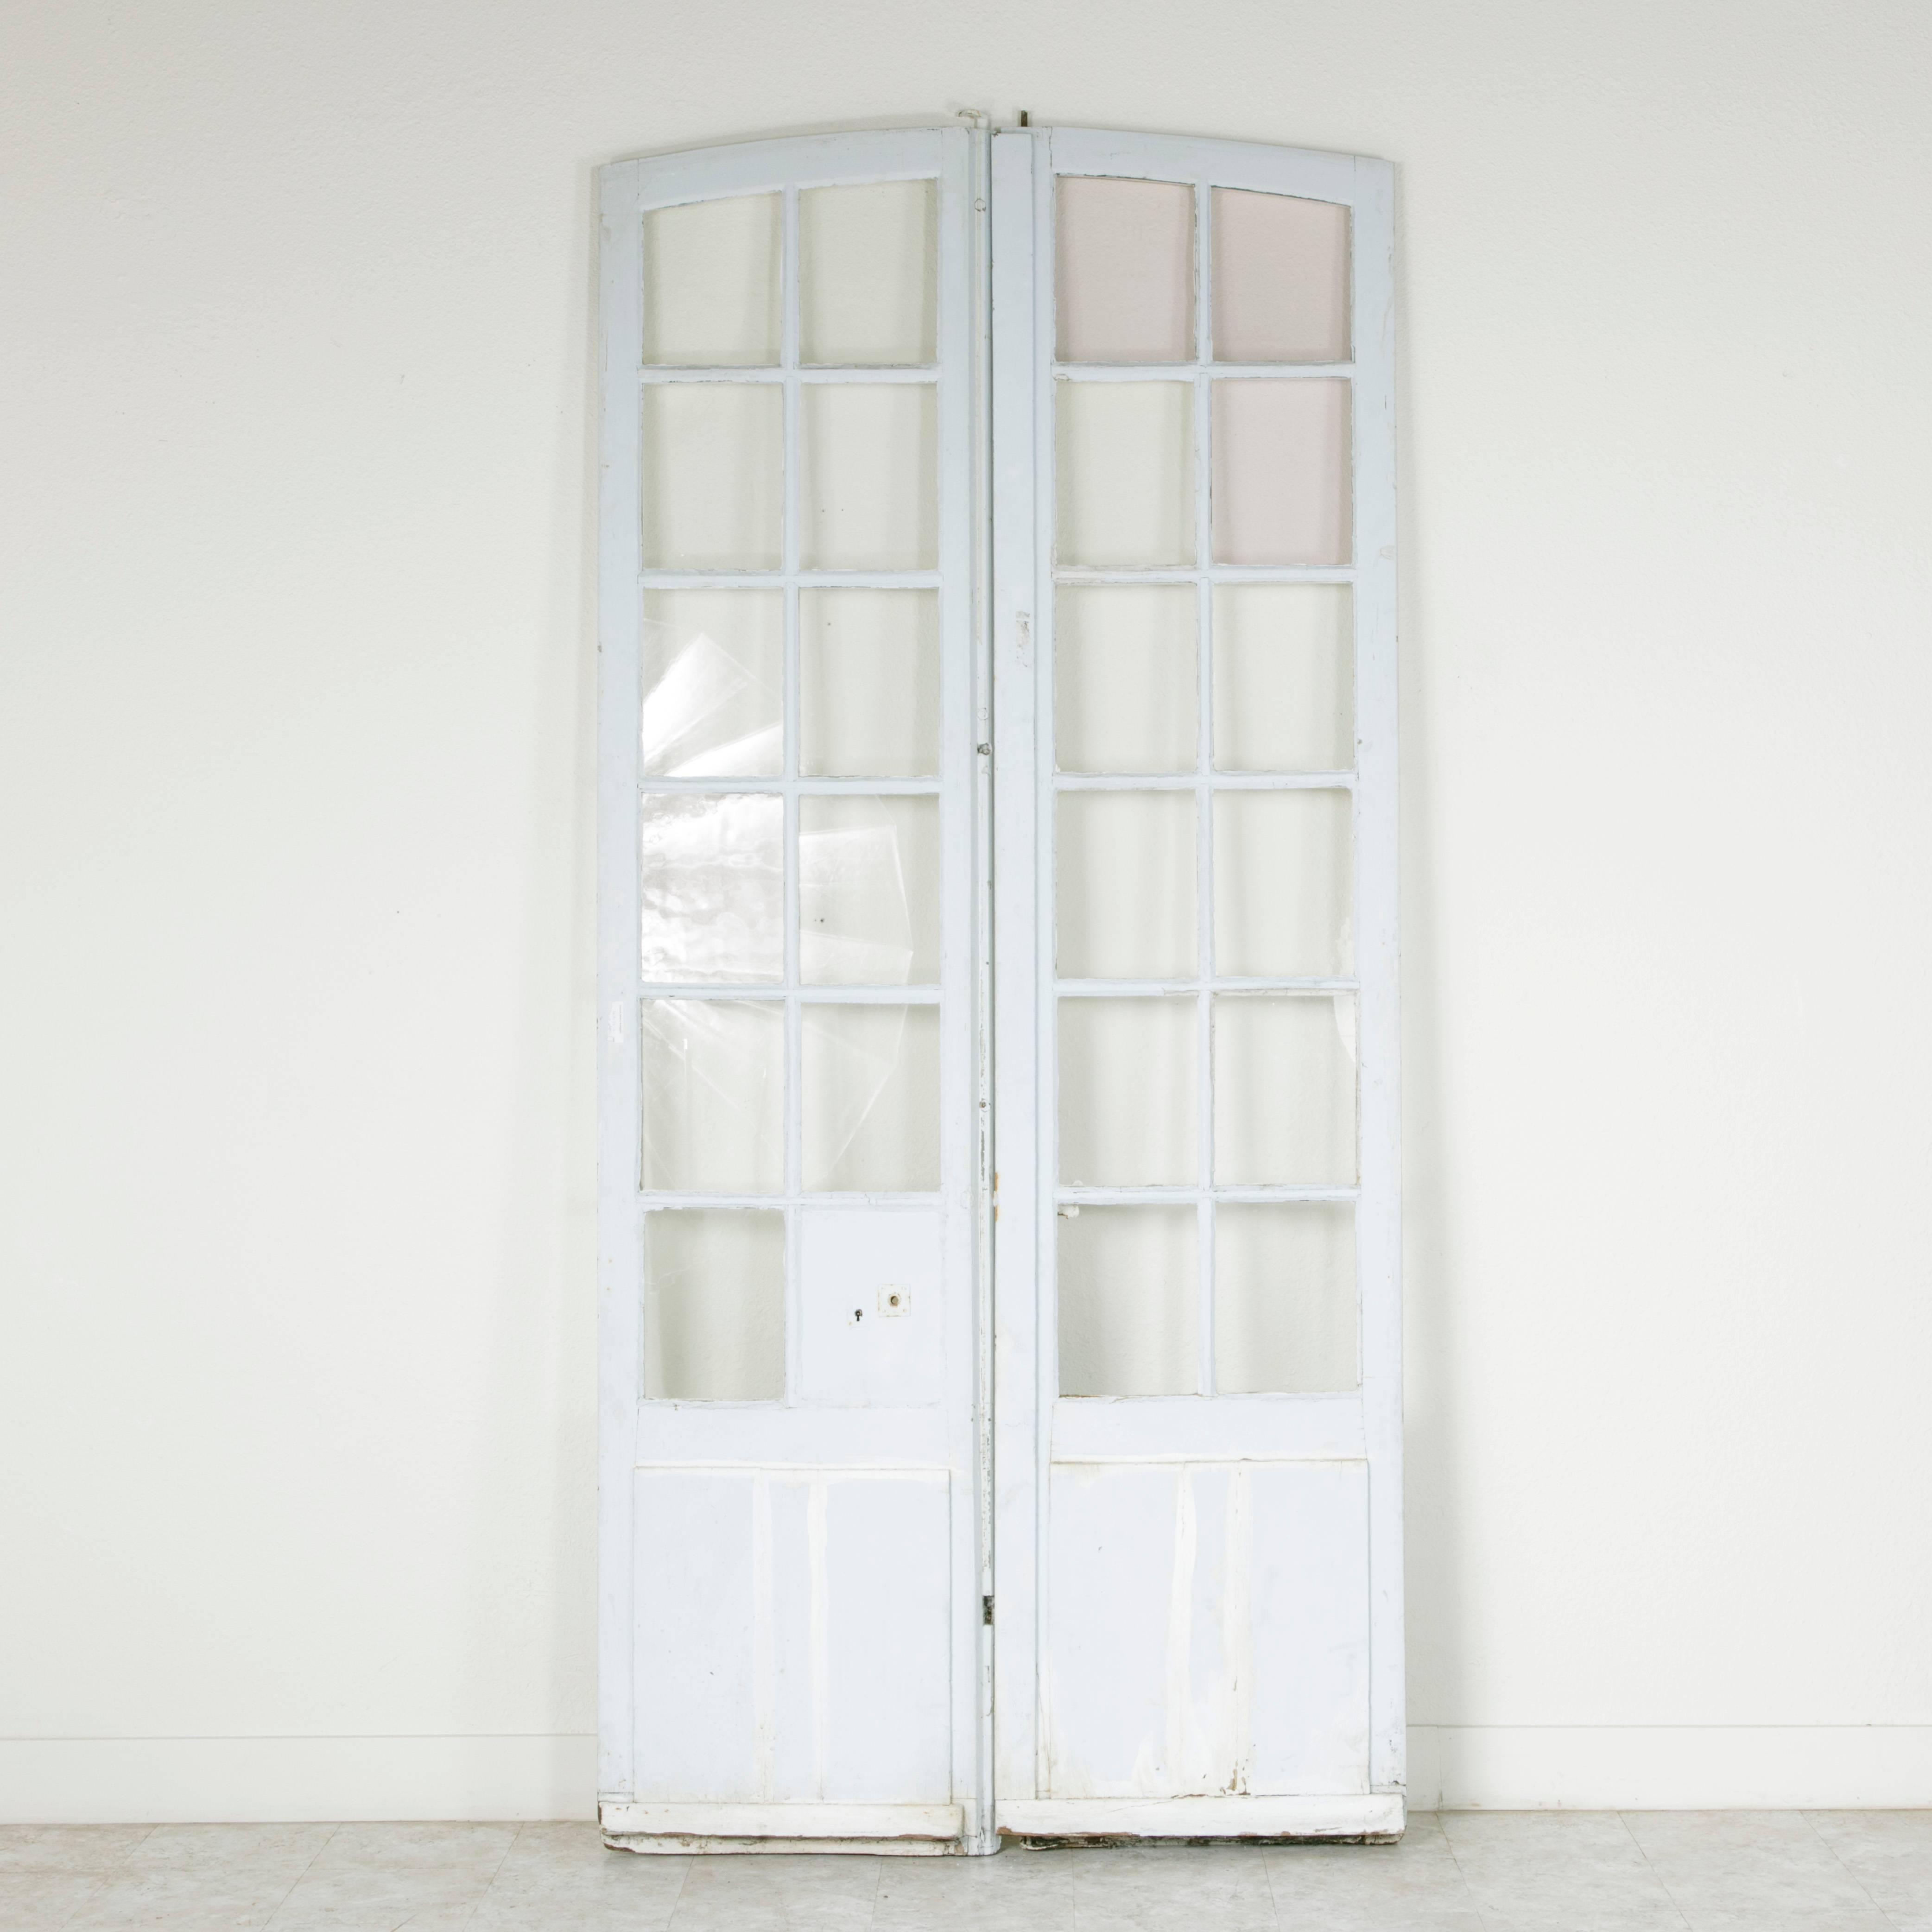 Monumental Pair of Arched 18th Century French Chateau Doors with Blown Glass 1